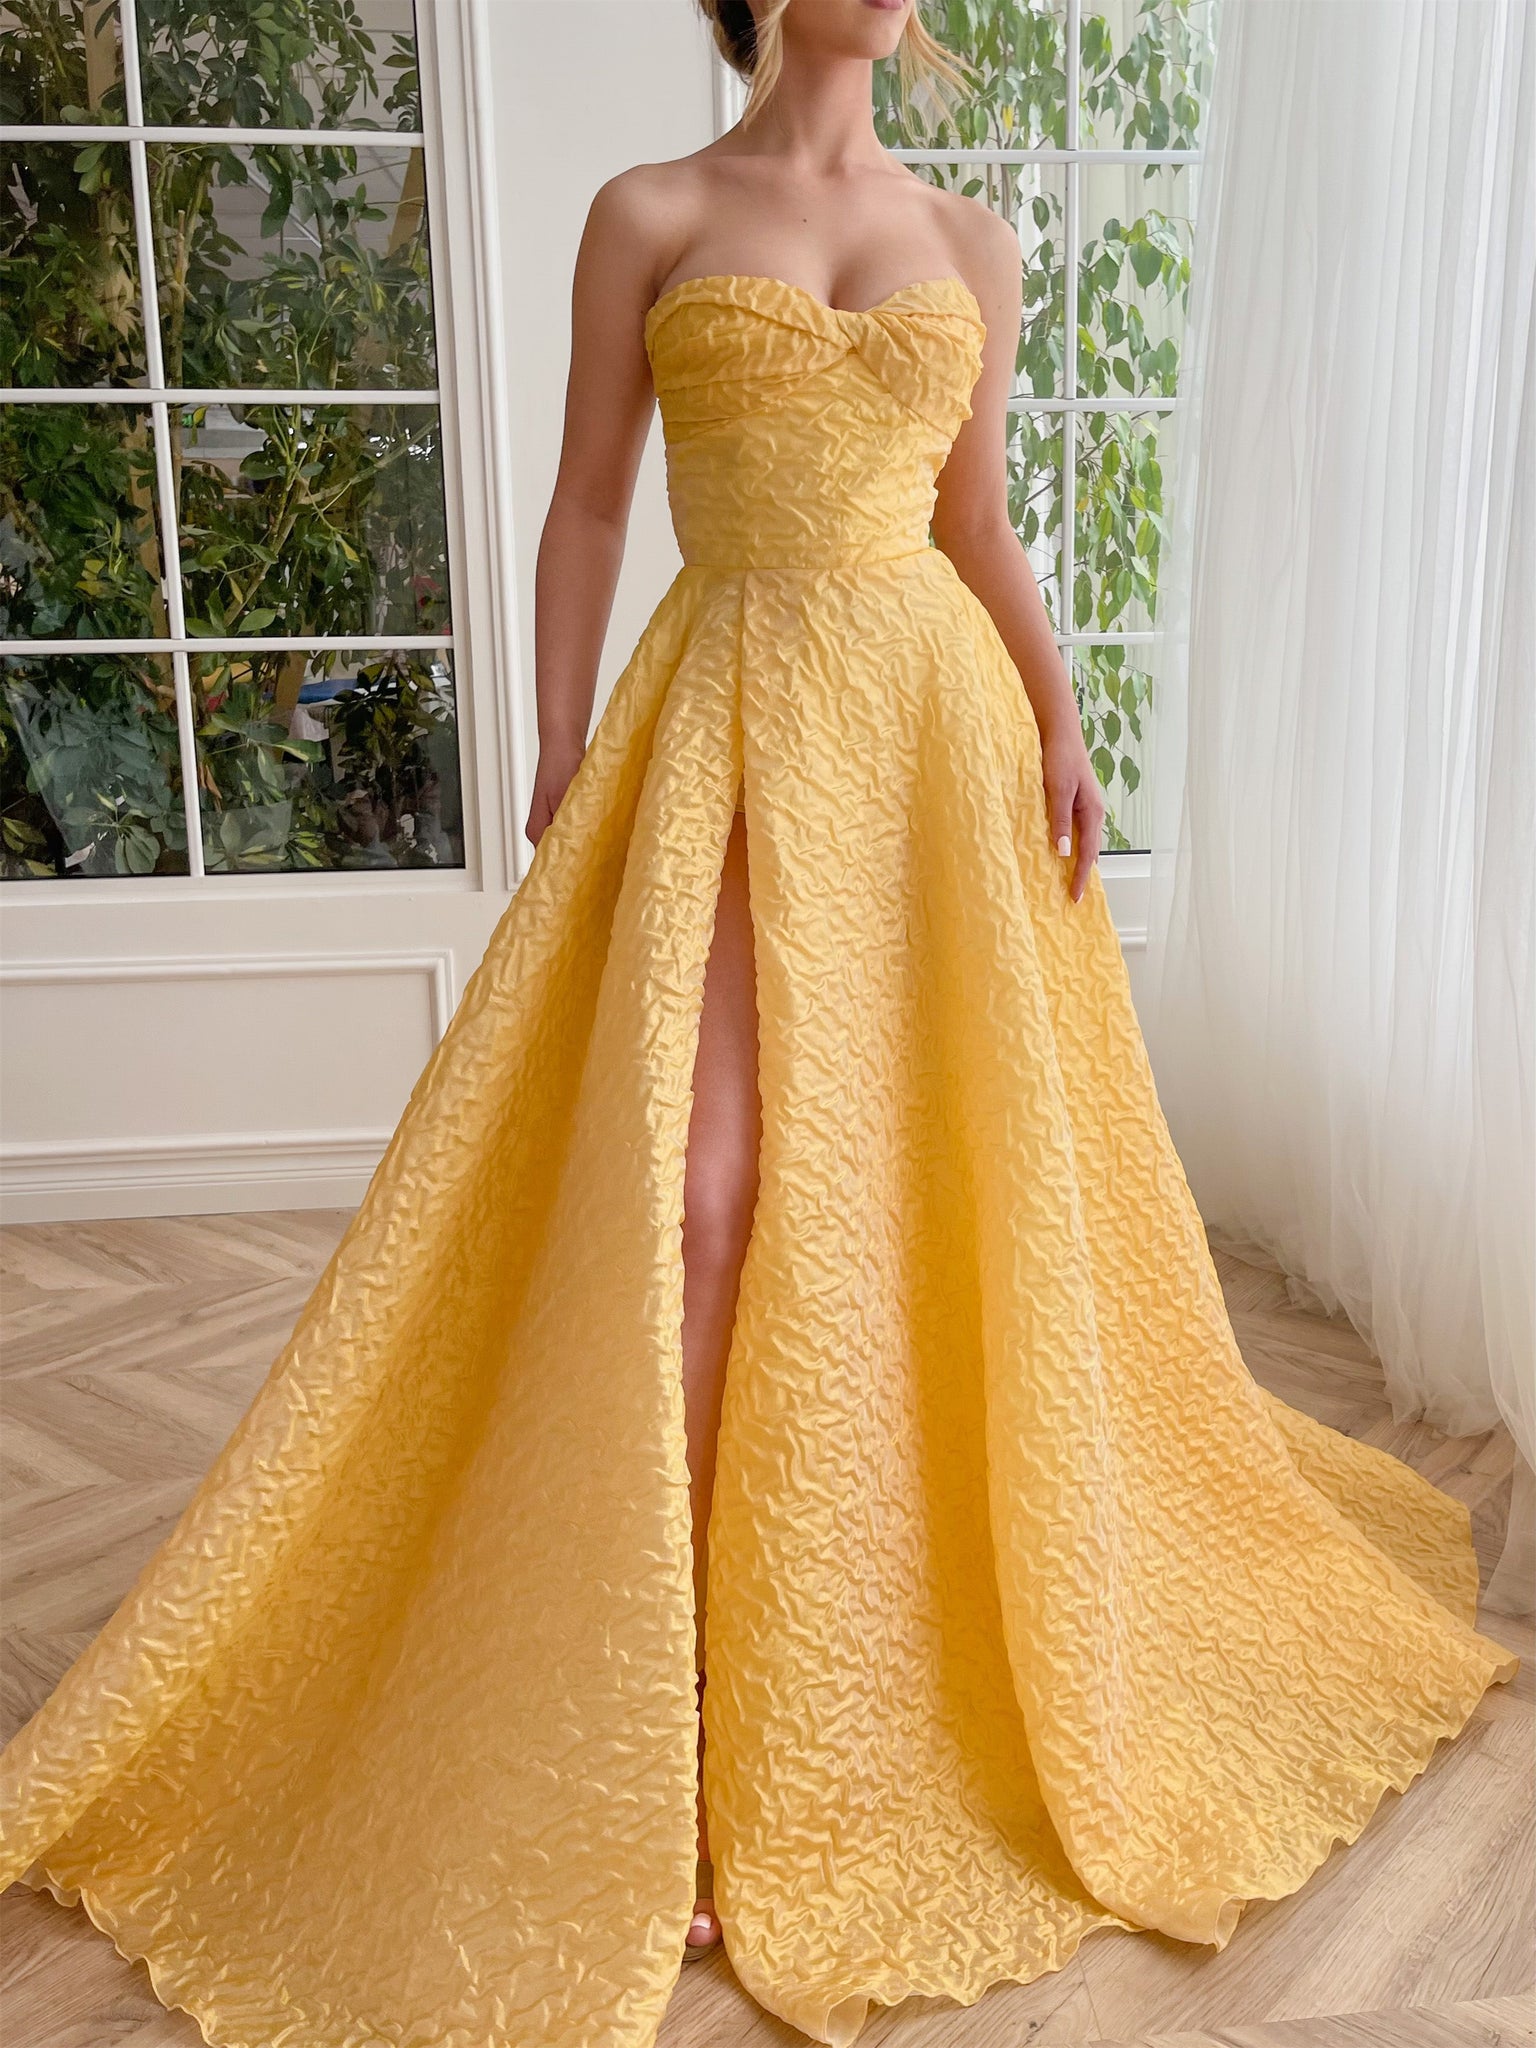 Strapless Yellow Sunlit Elegance Gown, Maxi Dresses, Newest Prom Dresses